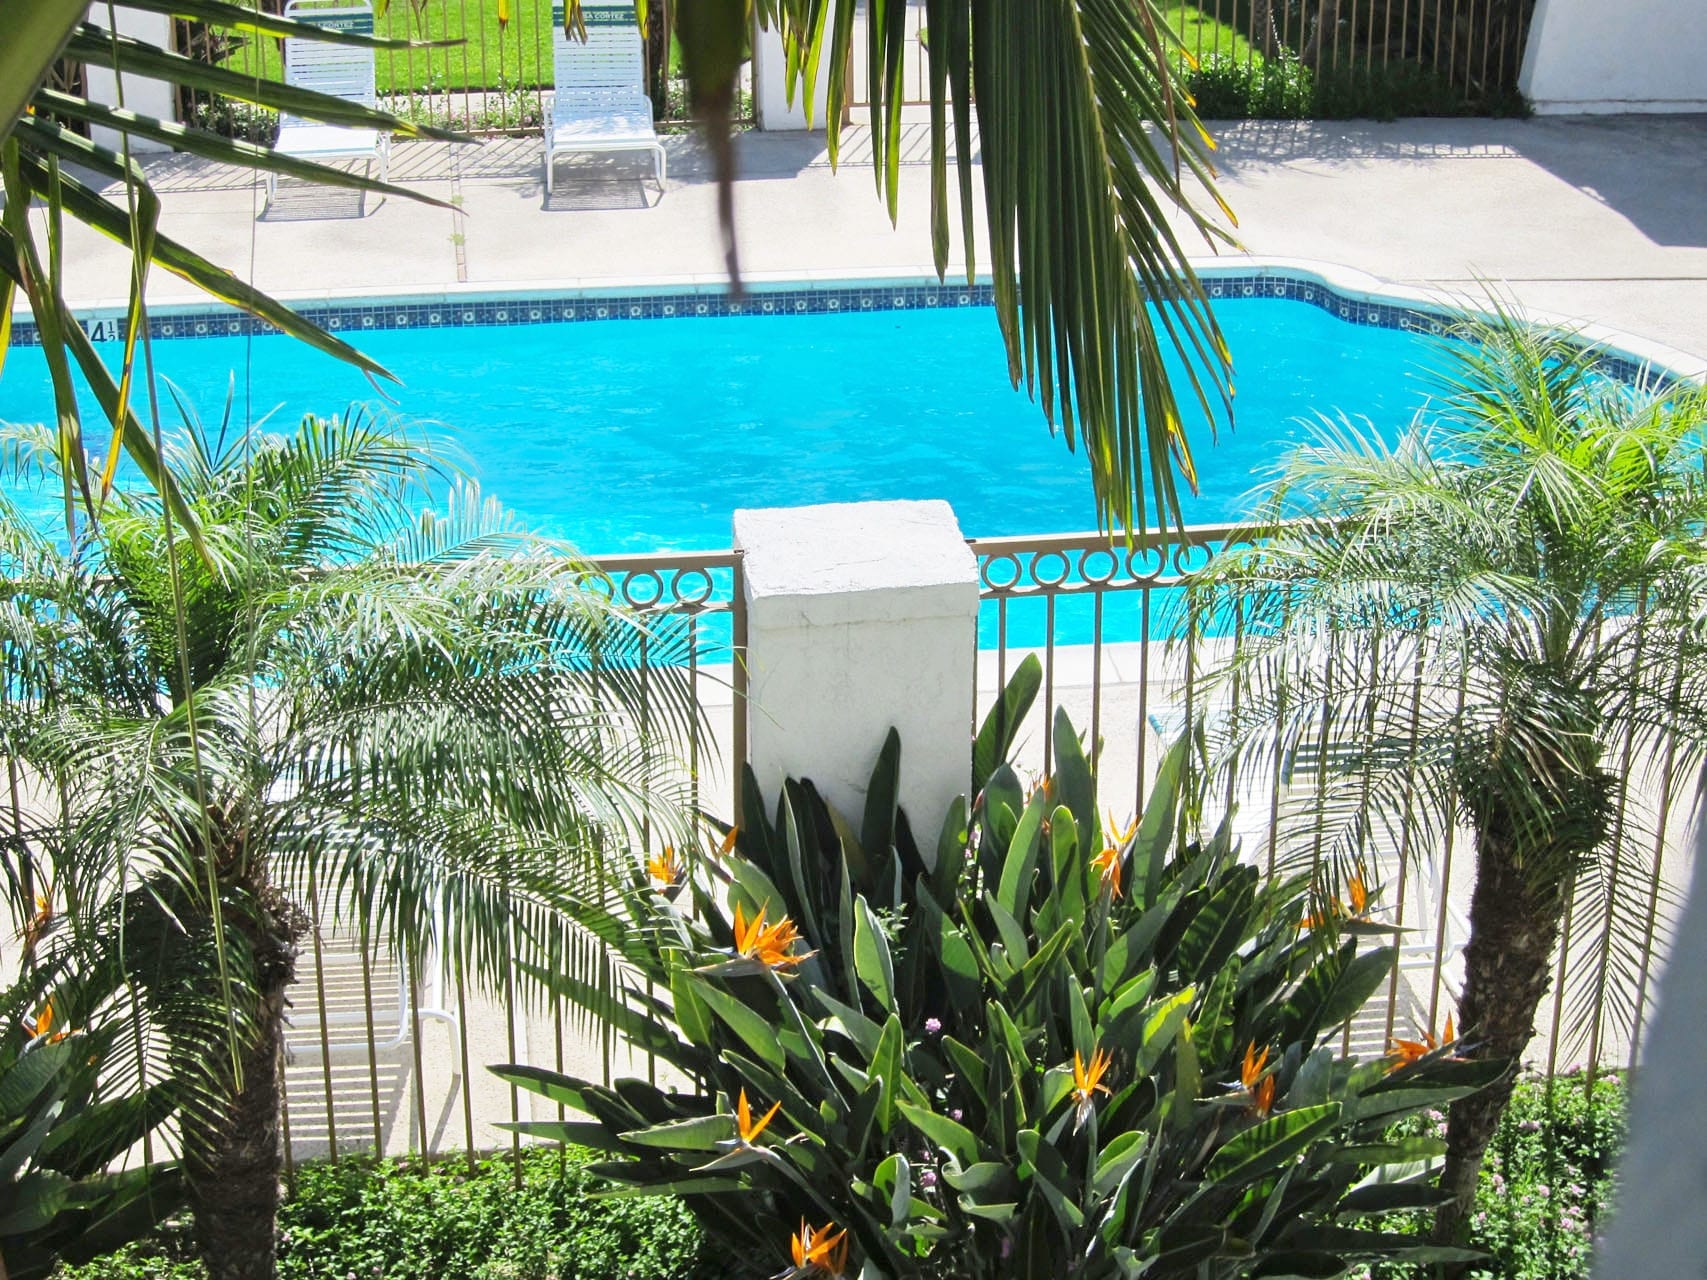 Peek between the palm trees and see the pool at the Casa Cortez apartment homes in Tustin California .